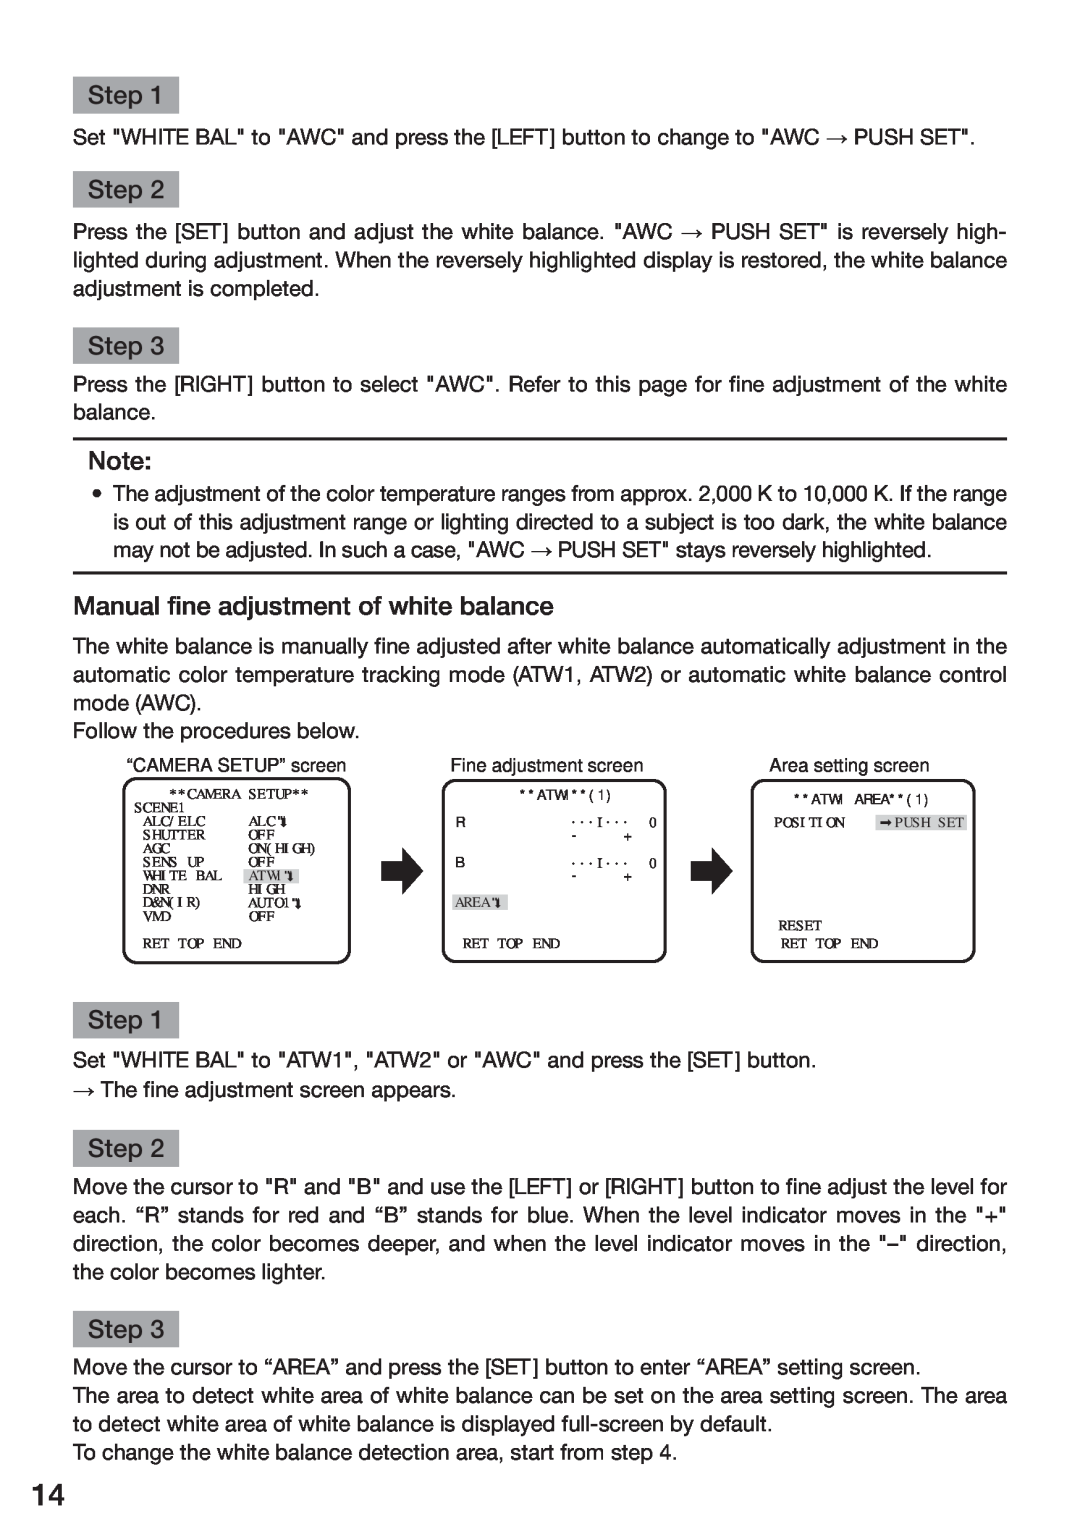 Panasonic WV-CP304, WV-CP310, WV-CP314, WV-CP300 operating instructions Manual fine adjustment of white balance, Step 